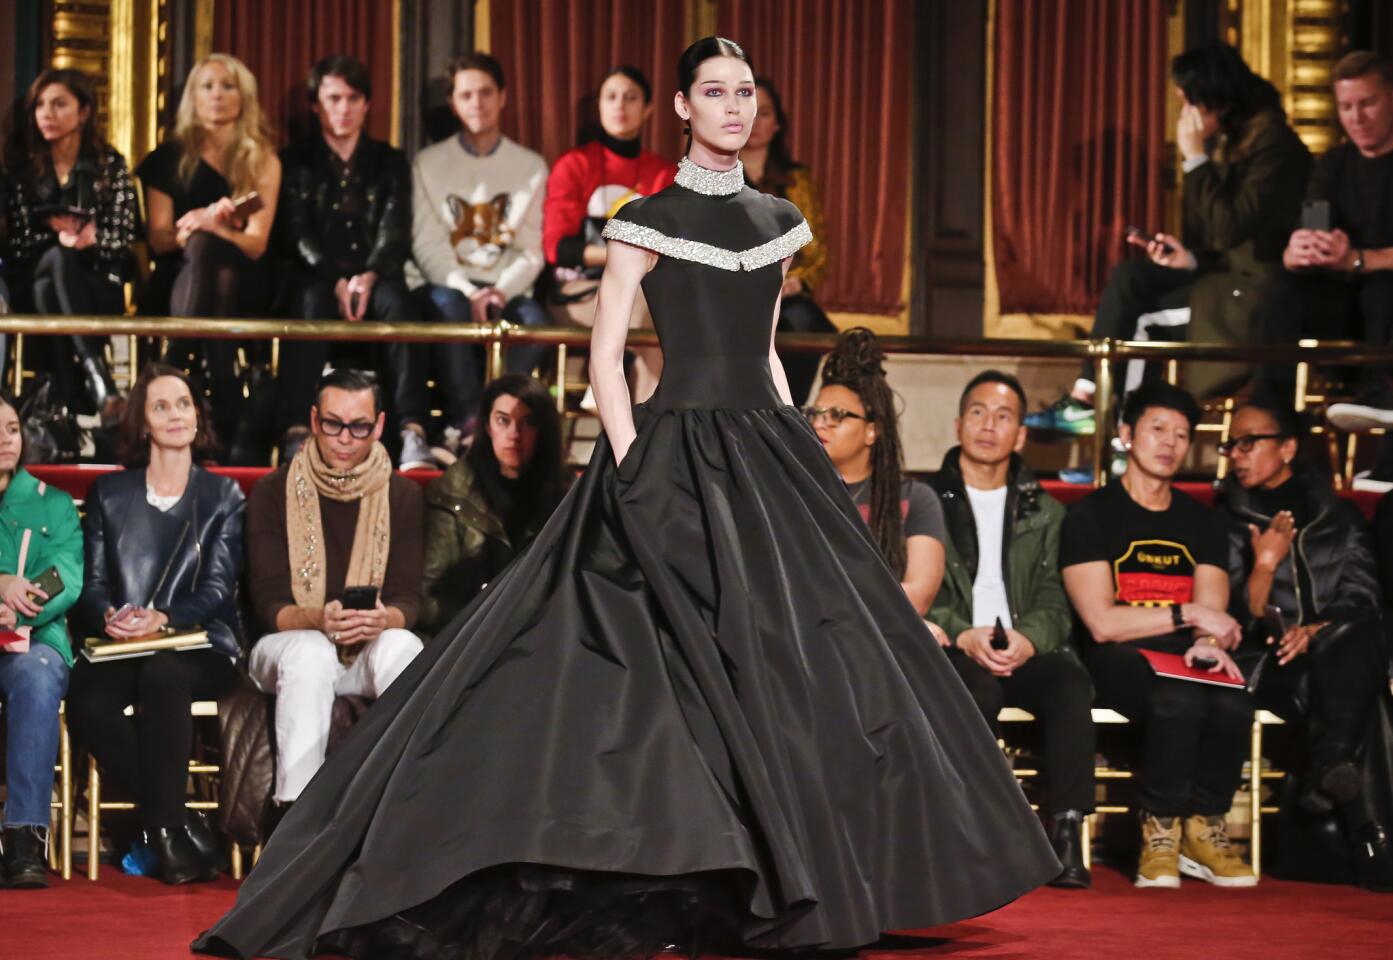 Christian Siriano's fall 2018 collection